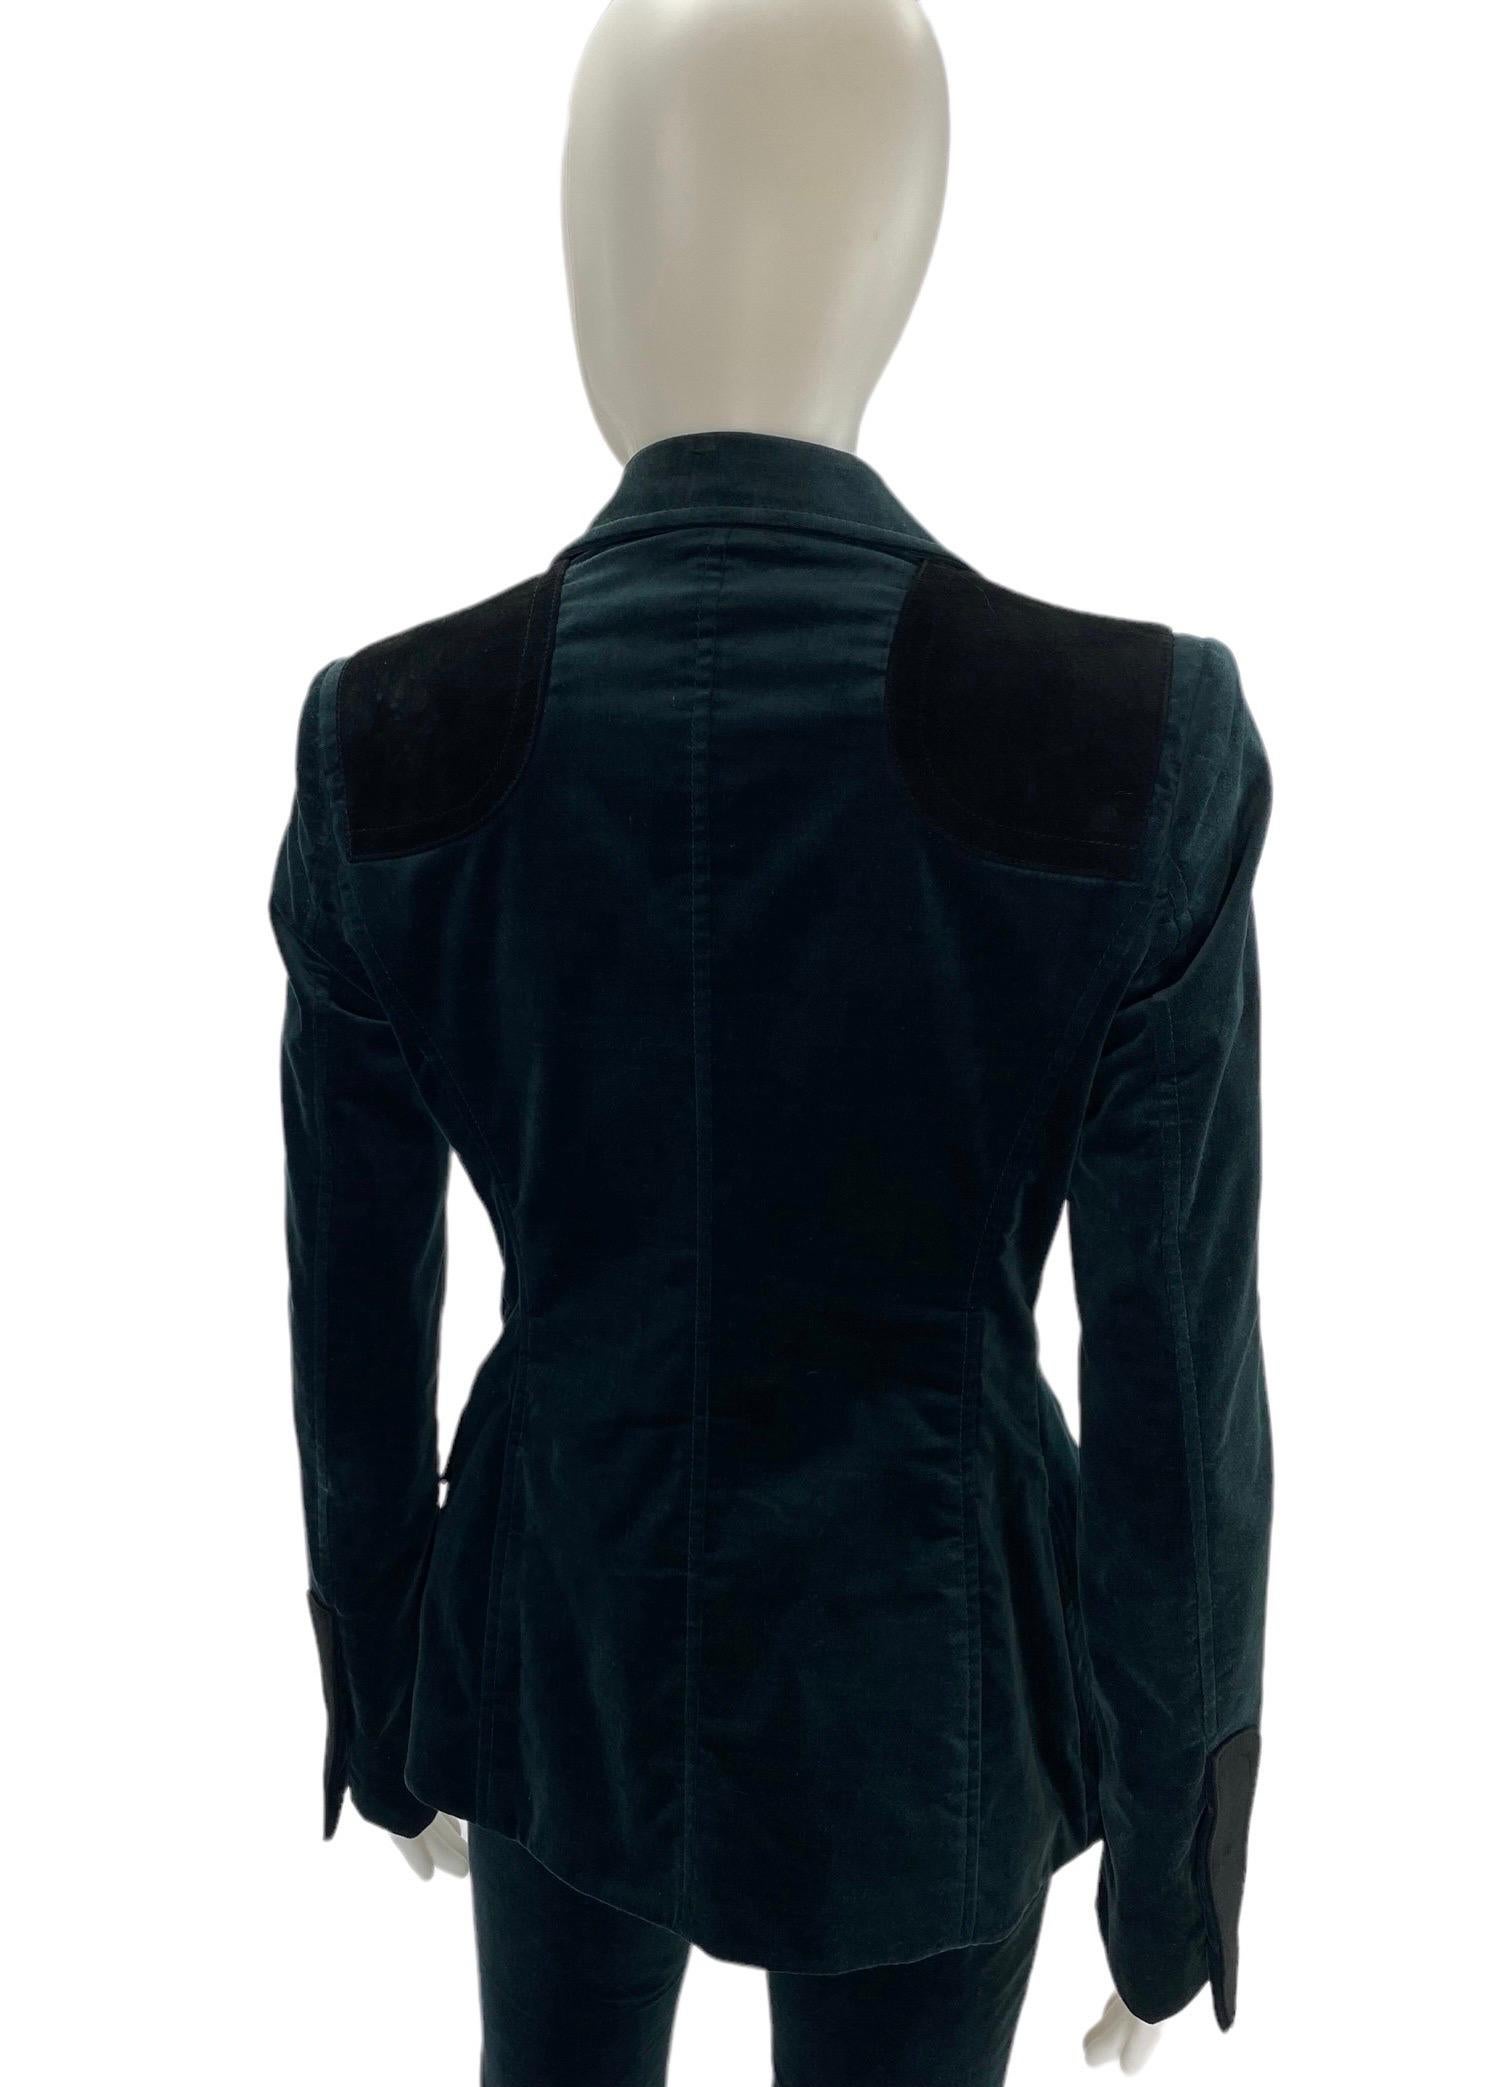 2005 Vintage Gucci Dark Green Velvet Pant Suit 38 - 2 In New Condition For Sale In Montgomery, TX